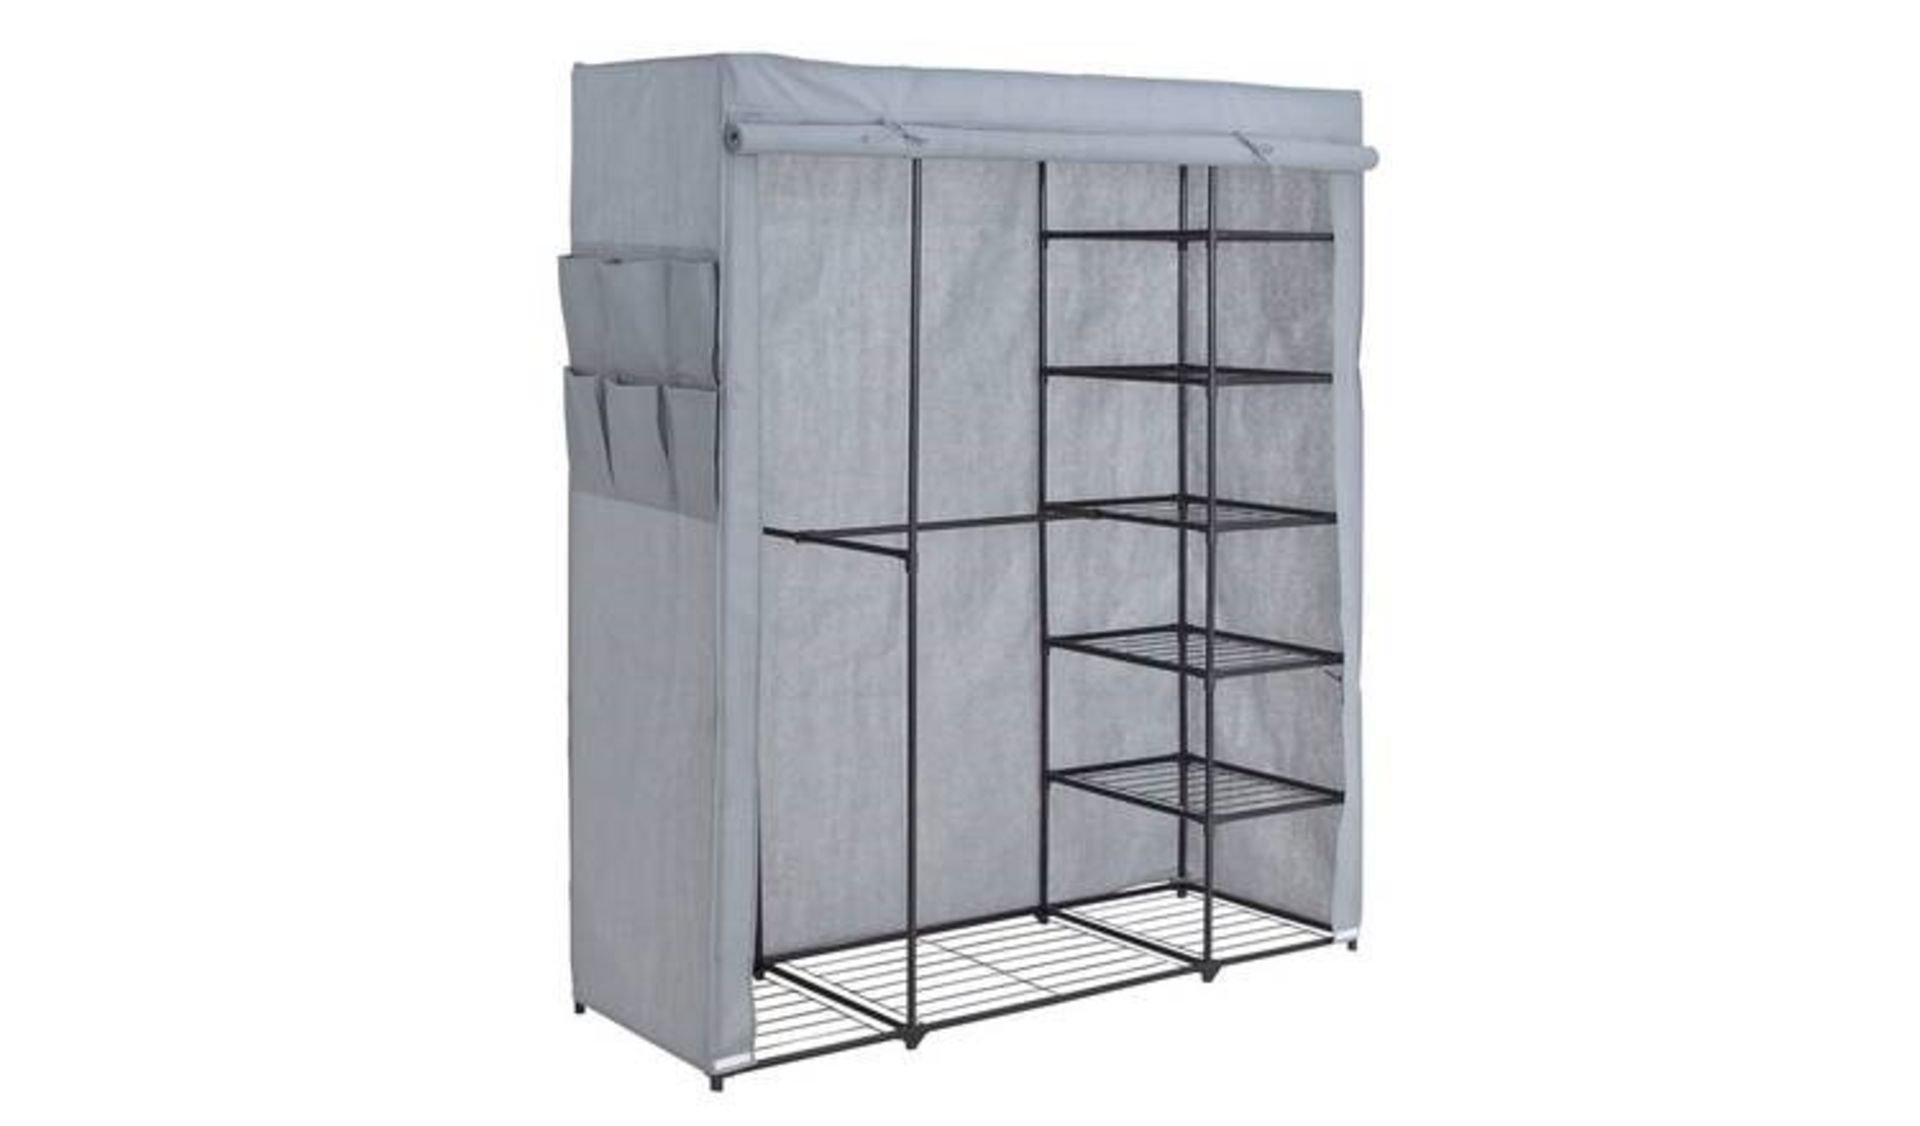 1 BOXED METAL FRAMED FABRIC WARDROBE / RRP £55.00 (PUBLIC VIEWING AVAILABLE)